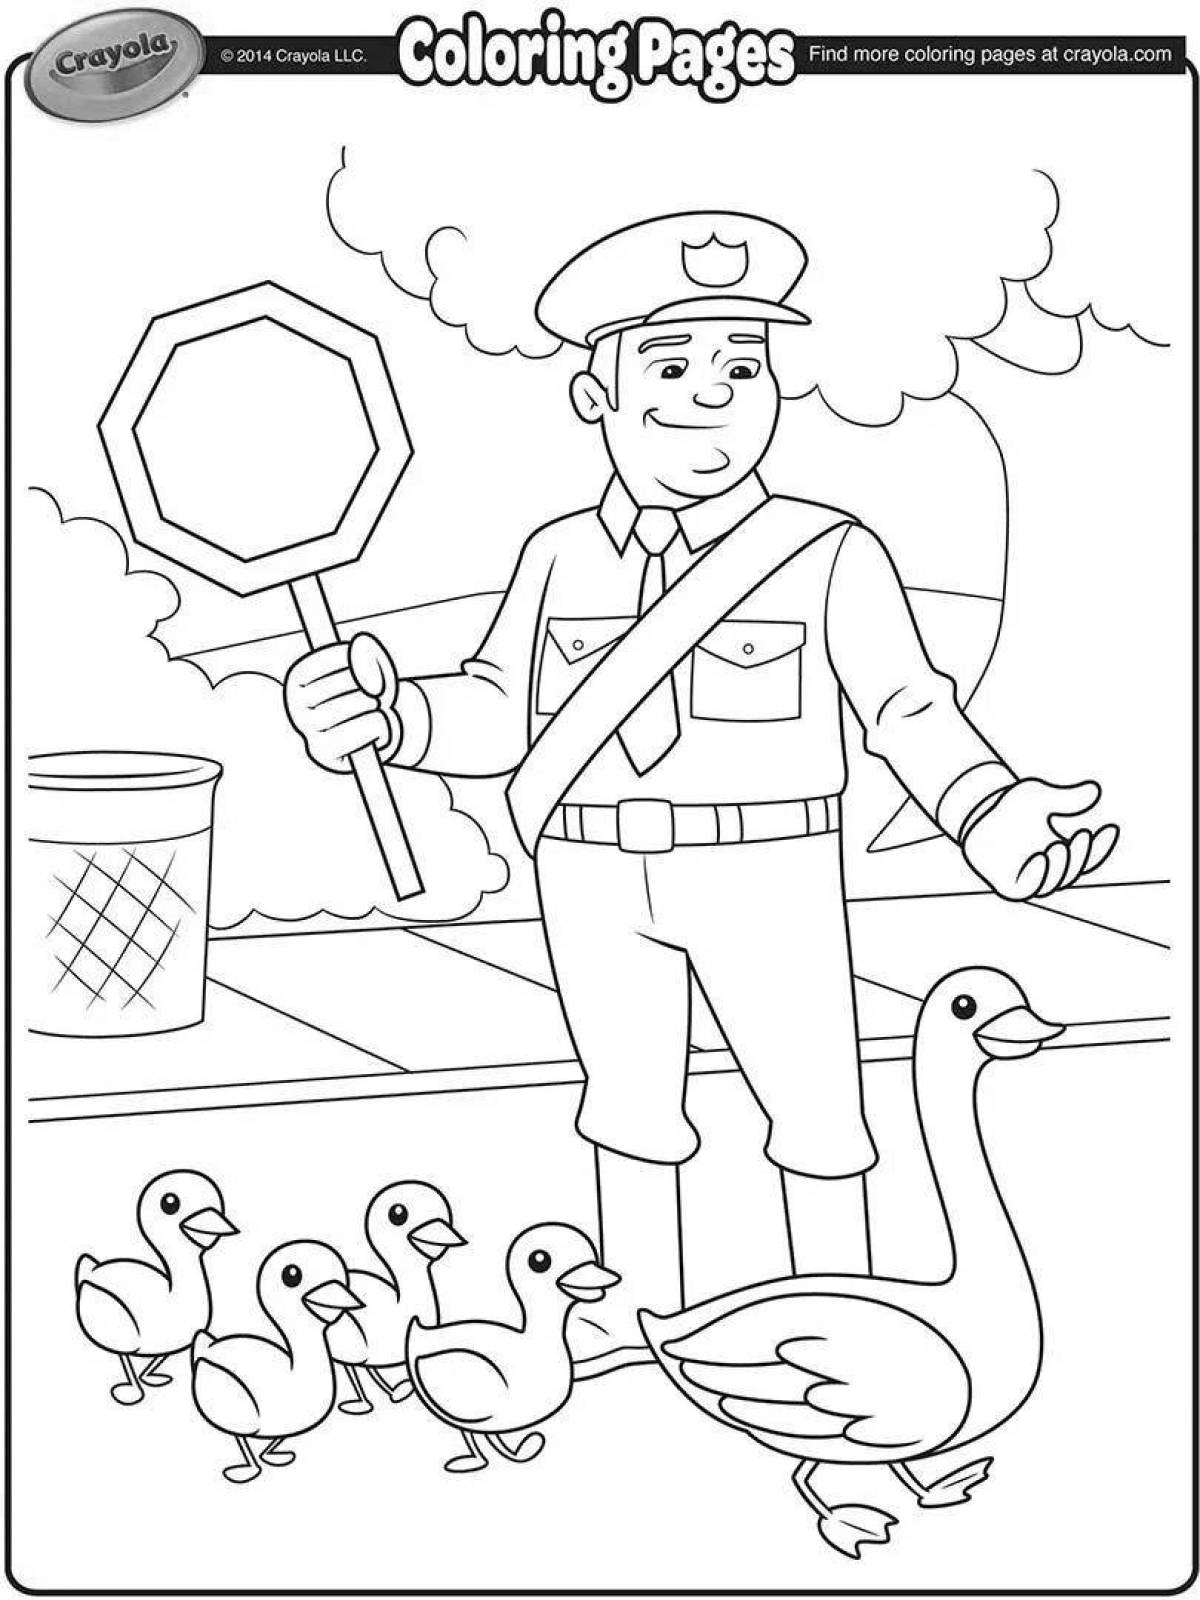 Intriguing professions coloring page